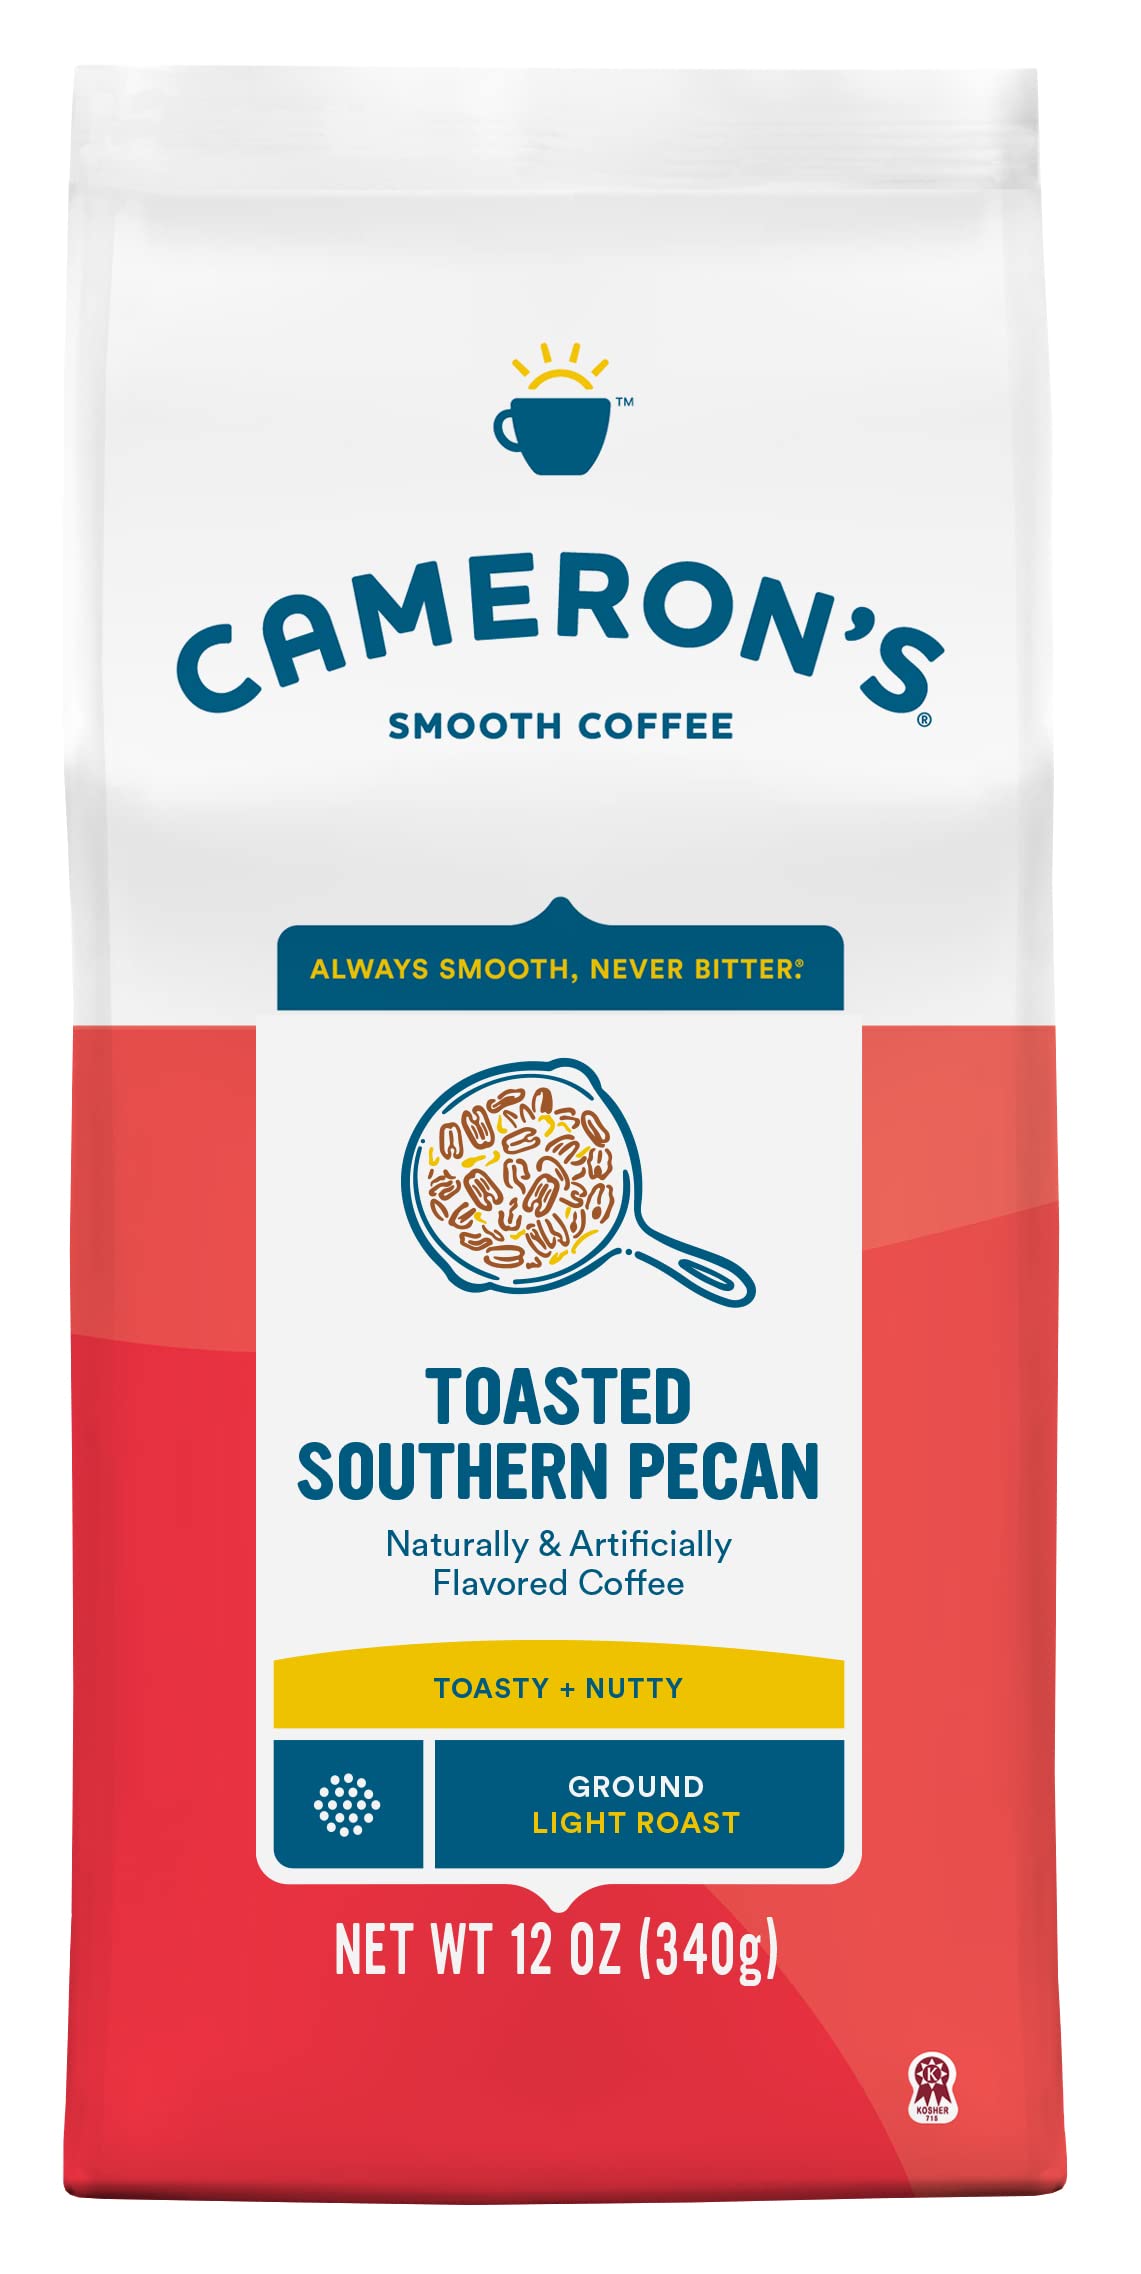 $4.72 /w S&S: 12oz Cameron's Roasted Ground Coffee Bag (Highlander Grog or Toasted Southern Pecan) at Amazon